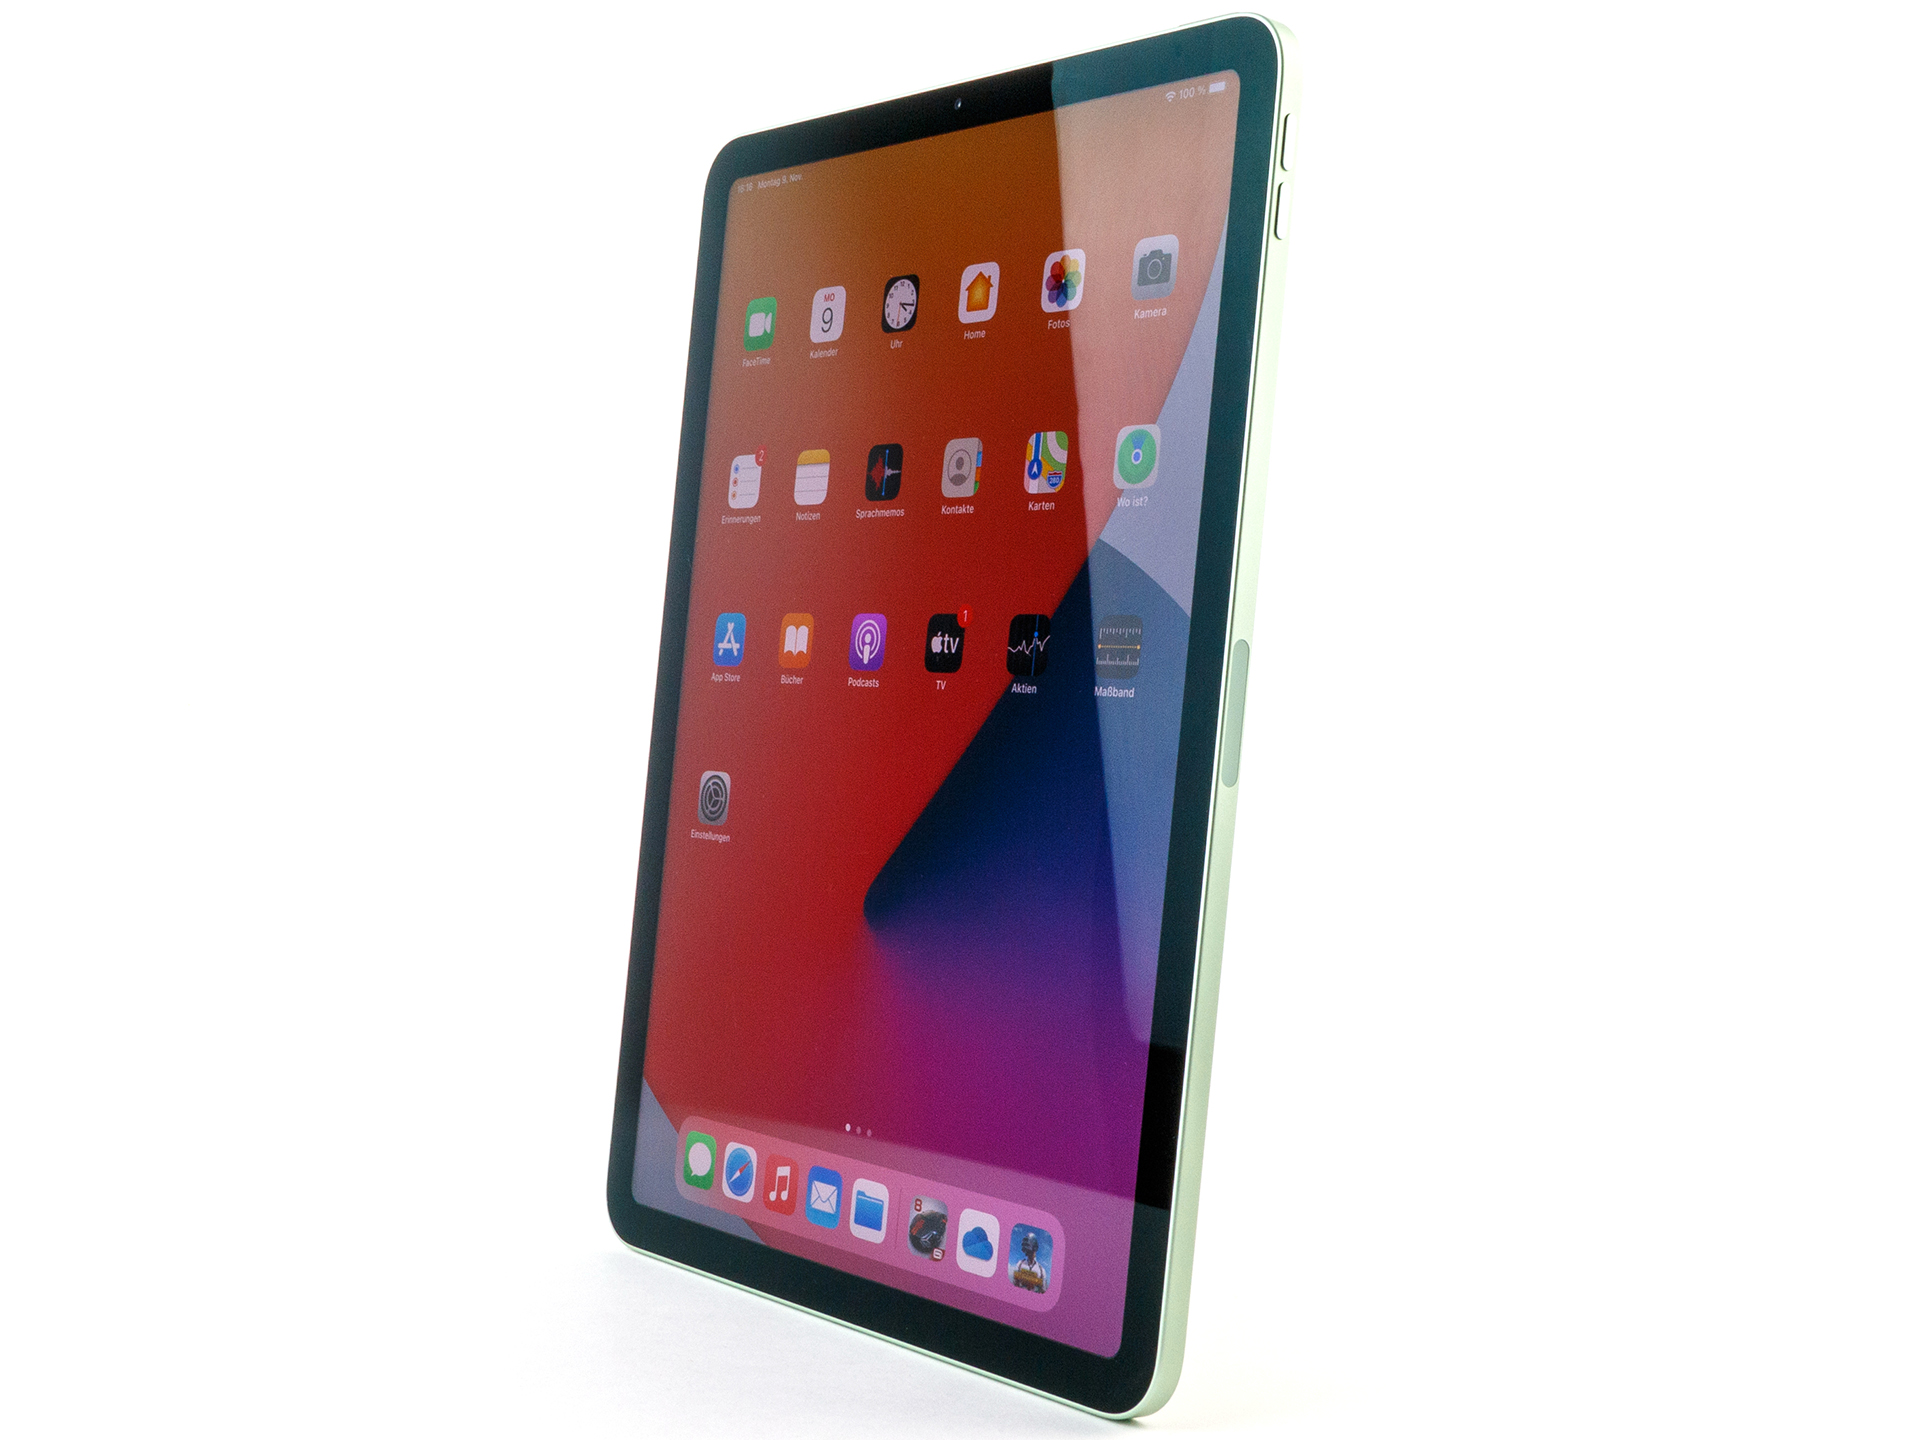 Apple iPad Air (2020) review: fast processor and pro design - The